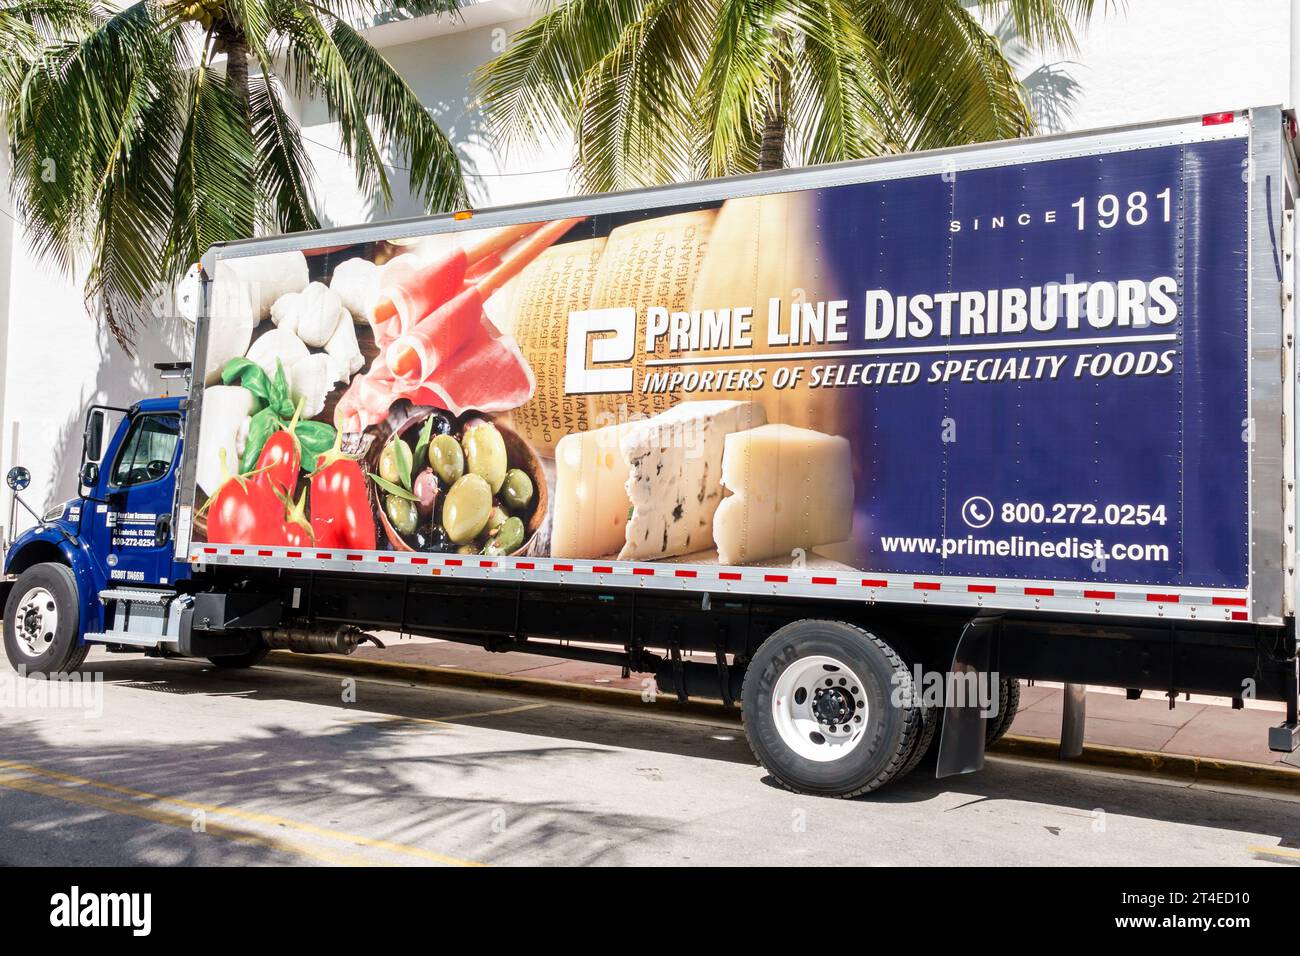 Miami Beach Florida,outside exterior,truck lorry food delivery service distributor,advertising livery,business Stock Photo